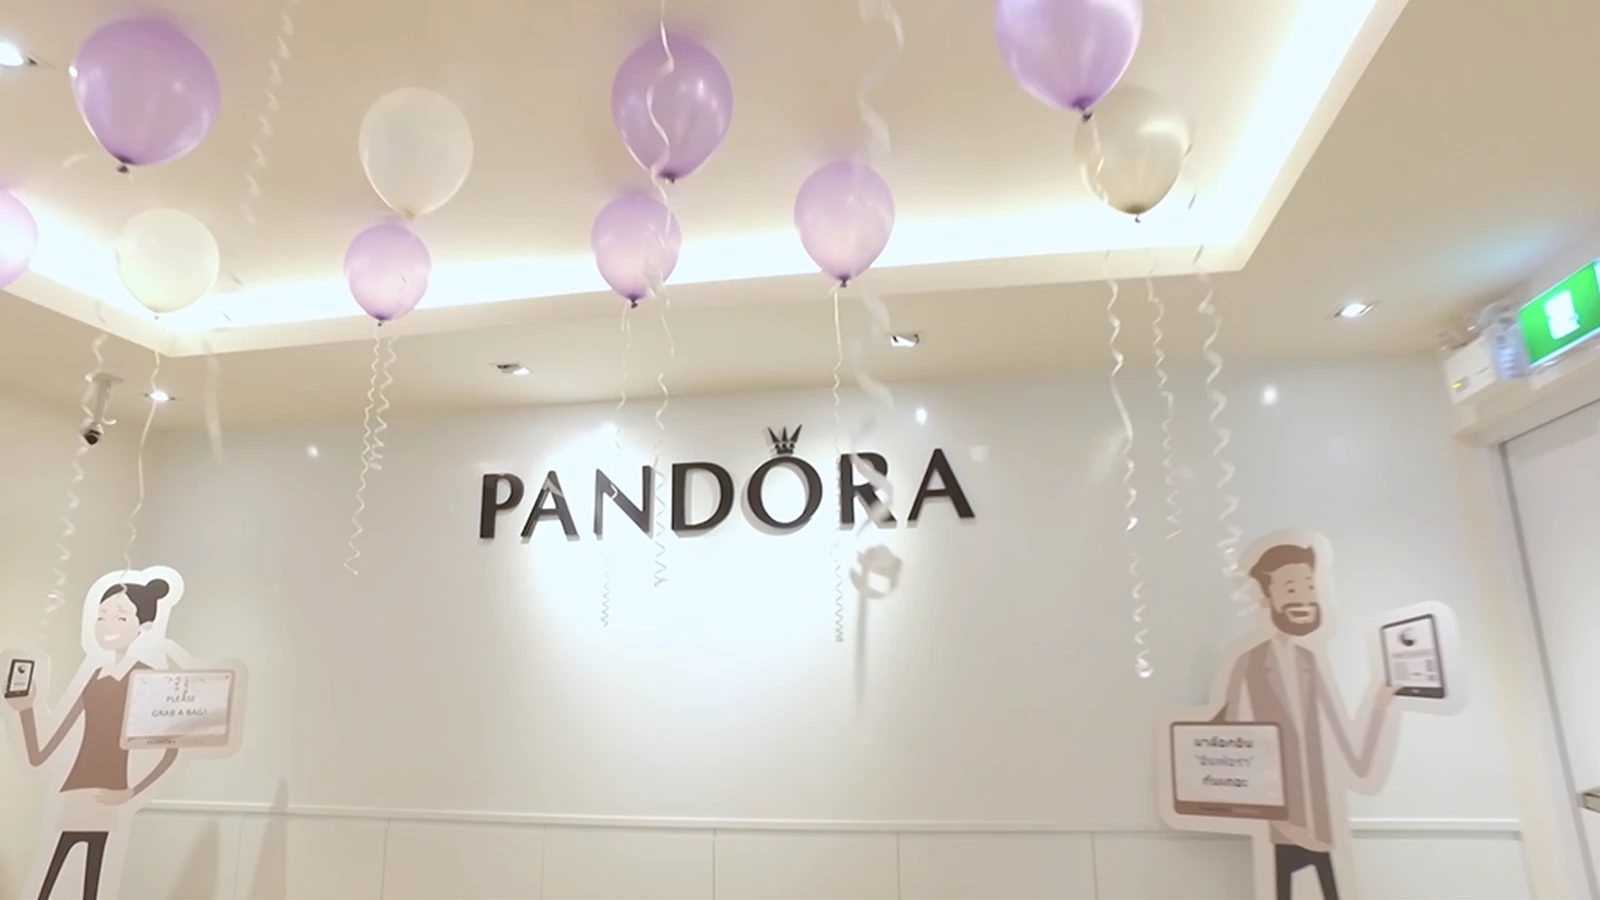 PANDORA shortlisted for two awards